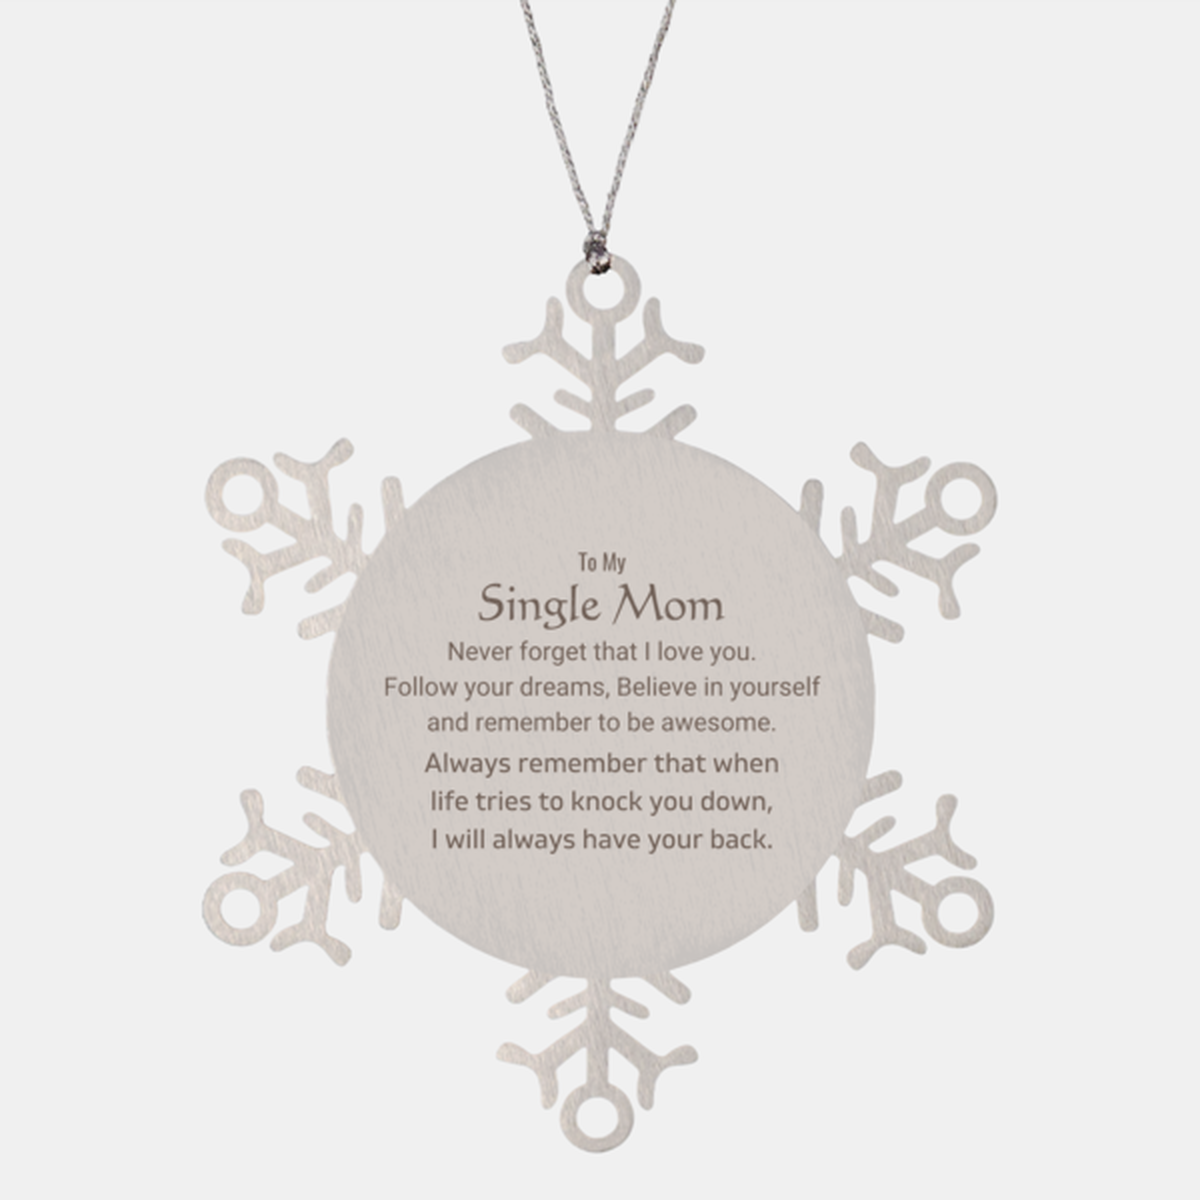 Inspirational Gifts for Single Mom, Follow your dreams, Believe in yourself, Single Mom Snowflake Ornament, Birthday Christmas Unique Gifts For Single Mom